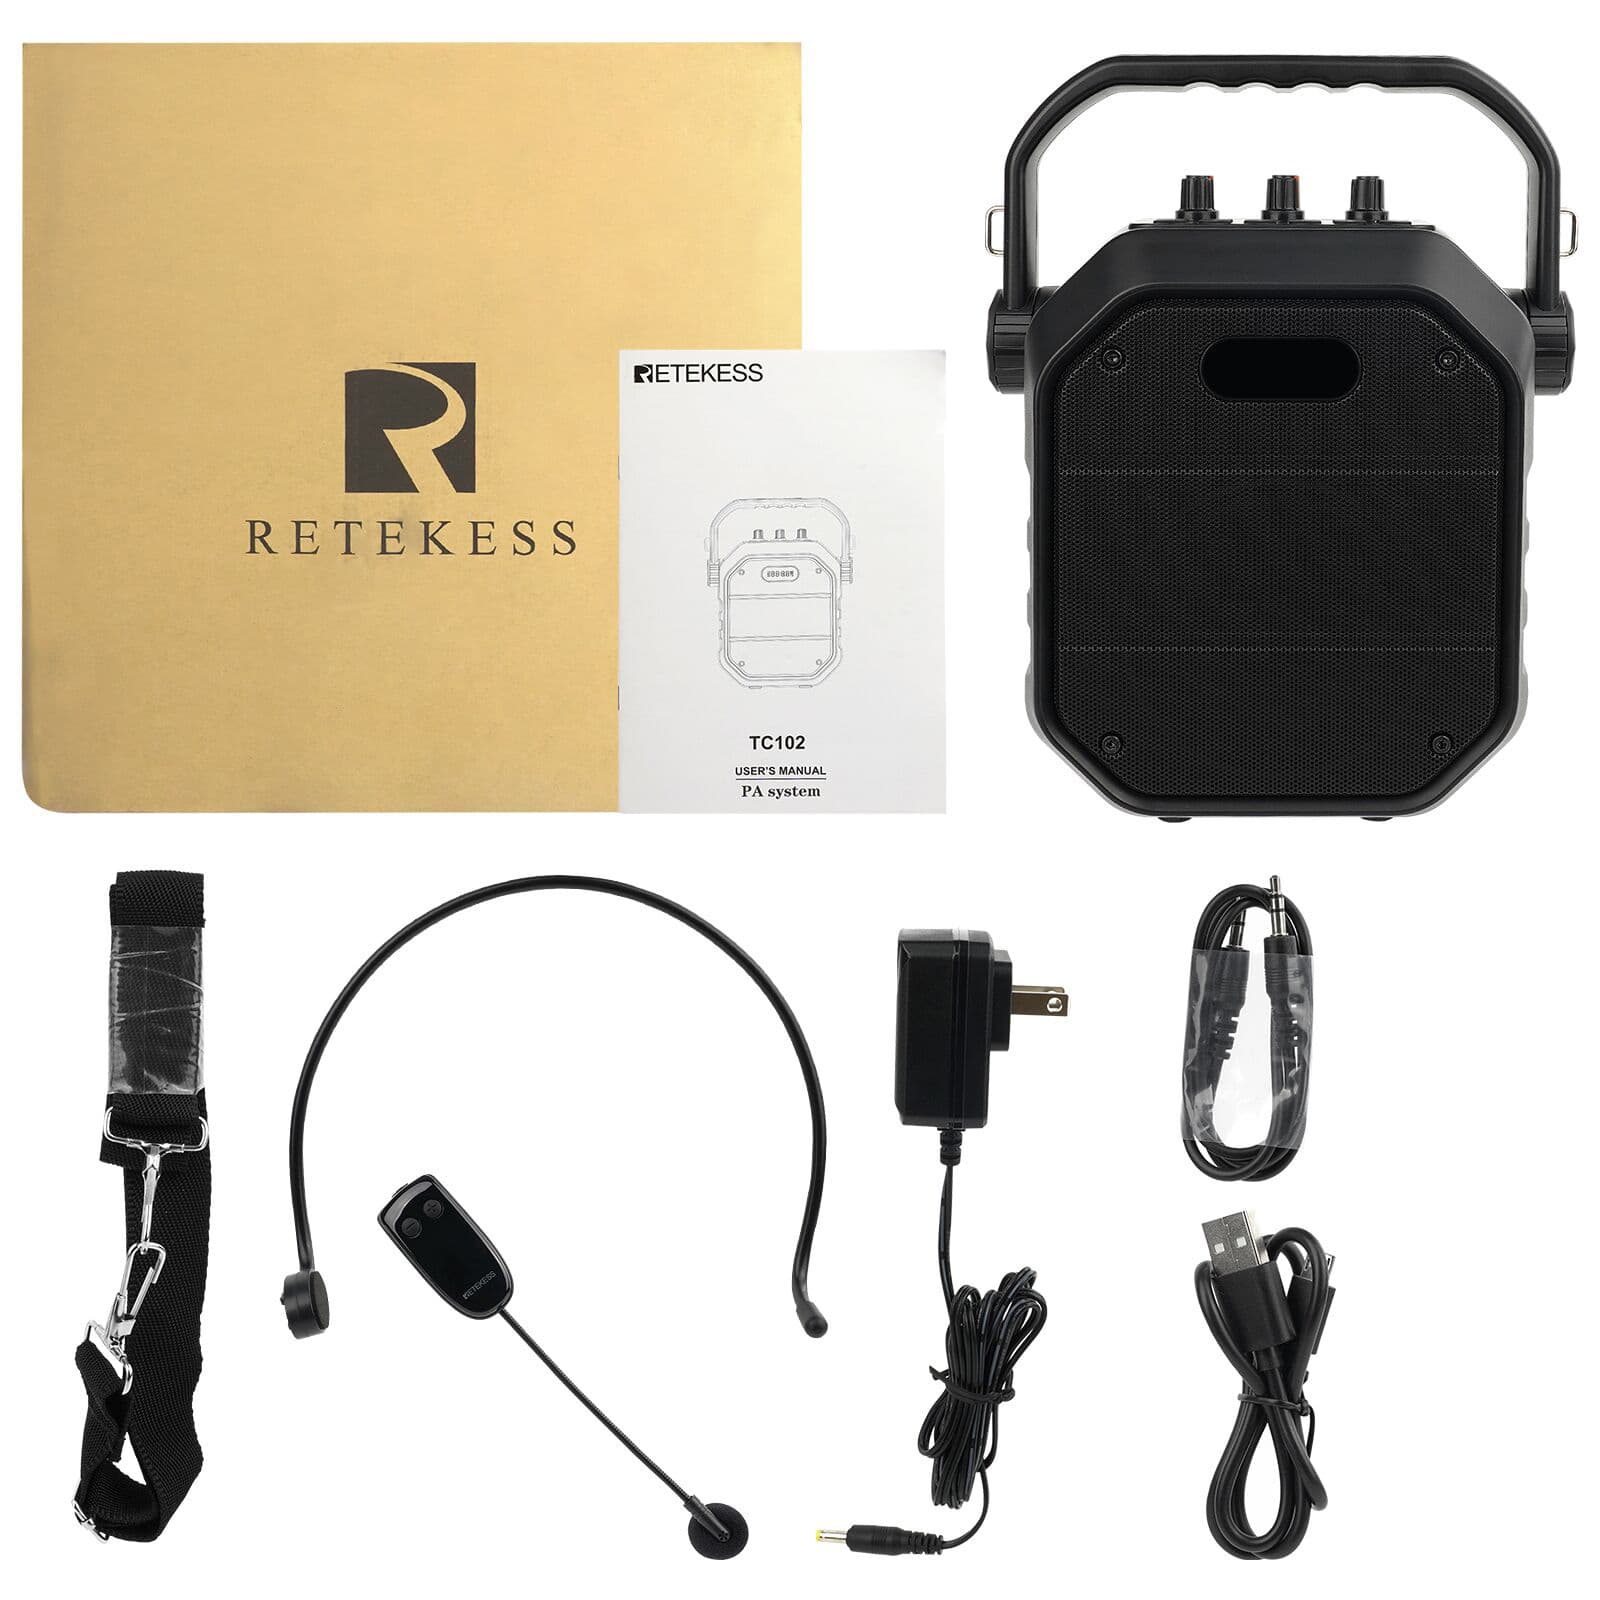 Retekess TC102 Portable PA System with Wireless Microphone 1 Speaker and 1 Headset Mic and 1 Handheld Mic